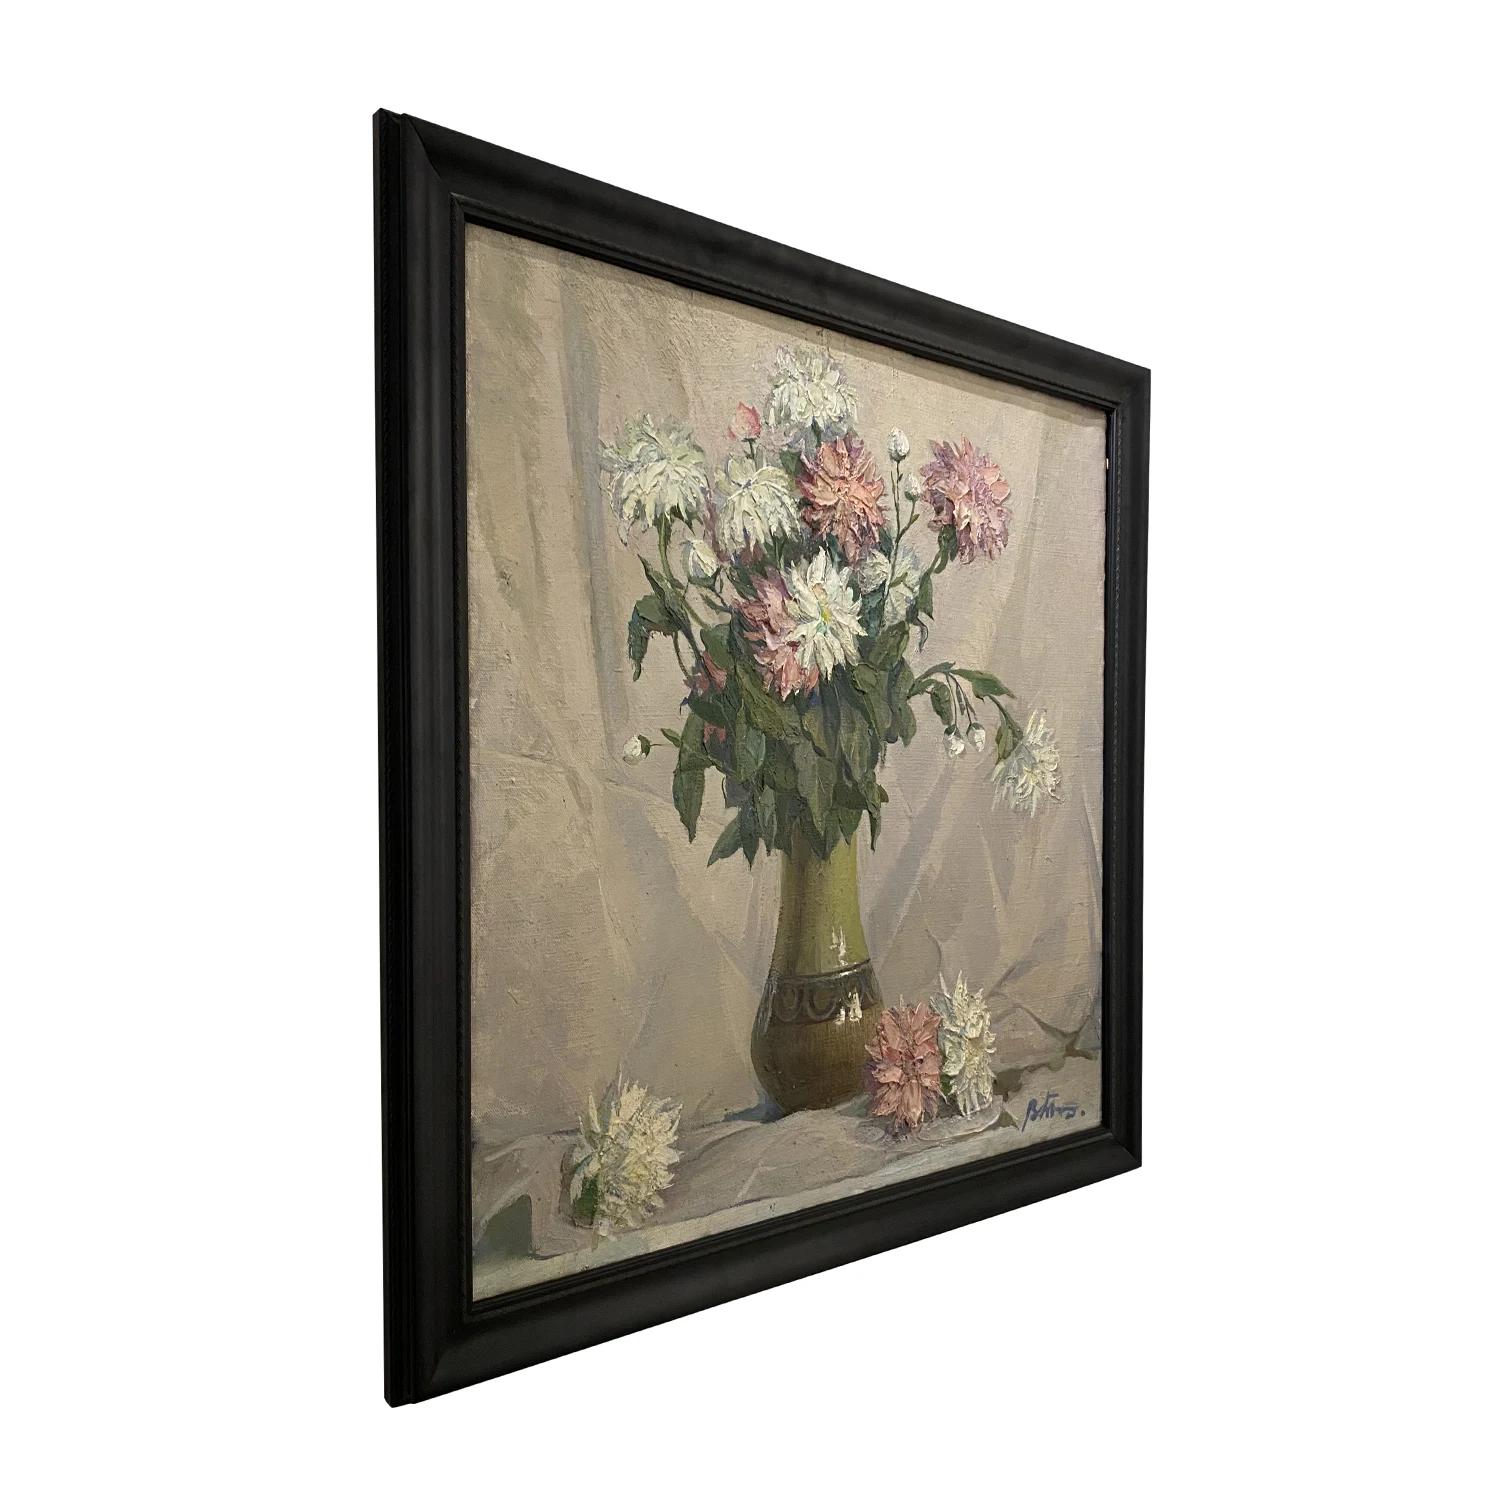 A white-pink, vintage Russian still life oil on canvas painting of a green ceramic vase with many different kinds of flowers, painted by Titov Y. V. in a black wooden frame, in good condition. The colorful painting is portraying a dim room with a